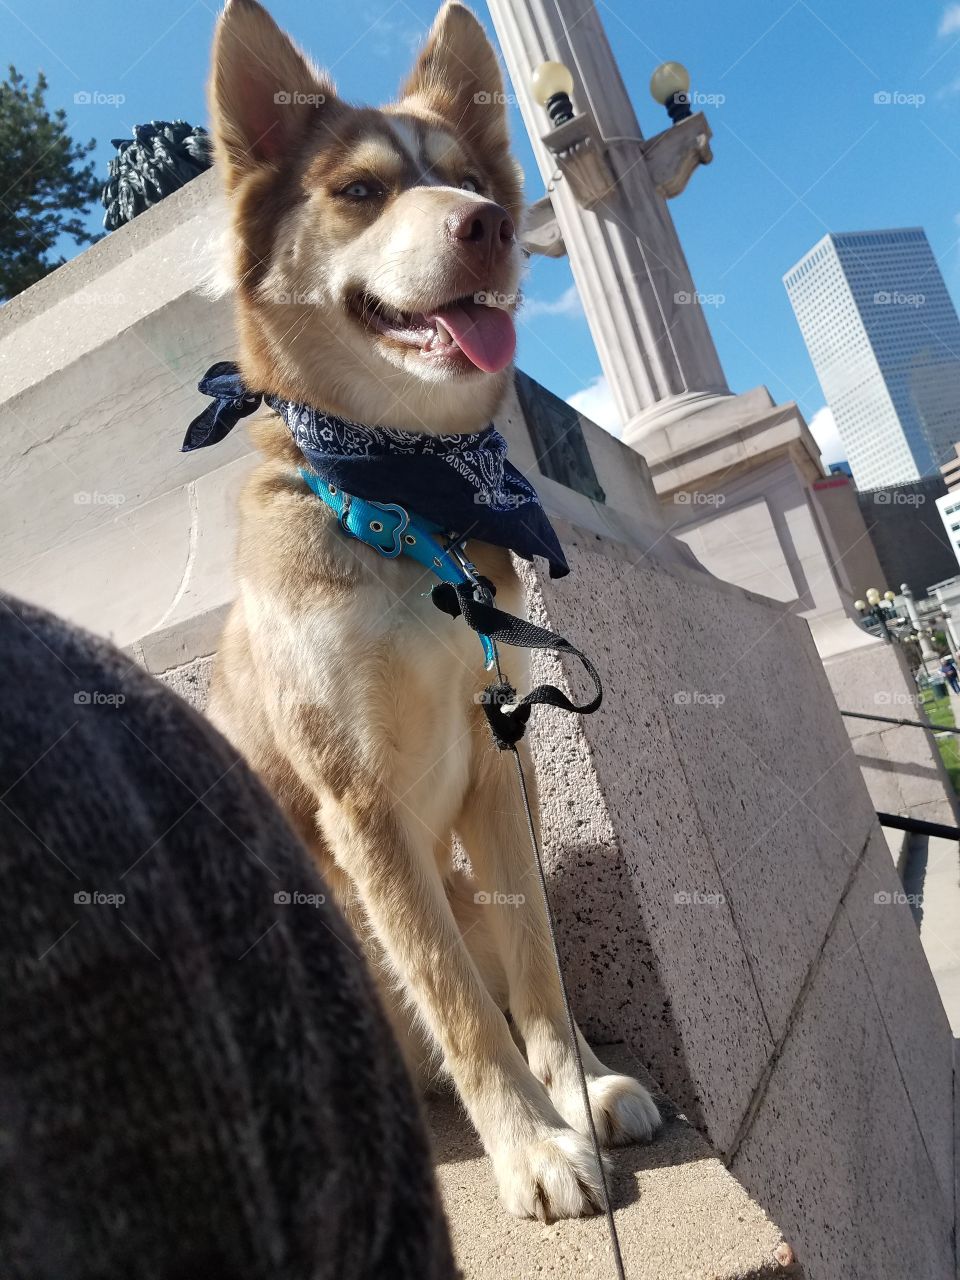 Lil pup In big city